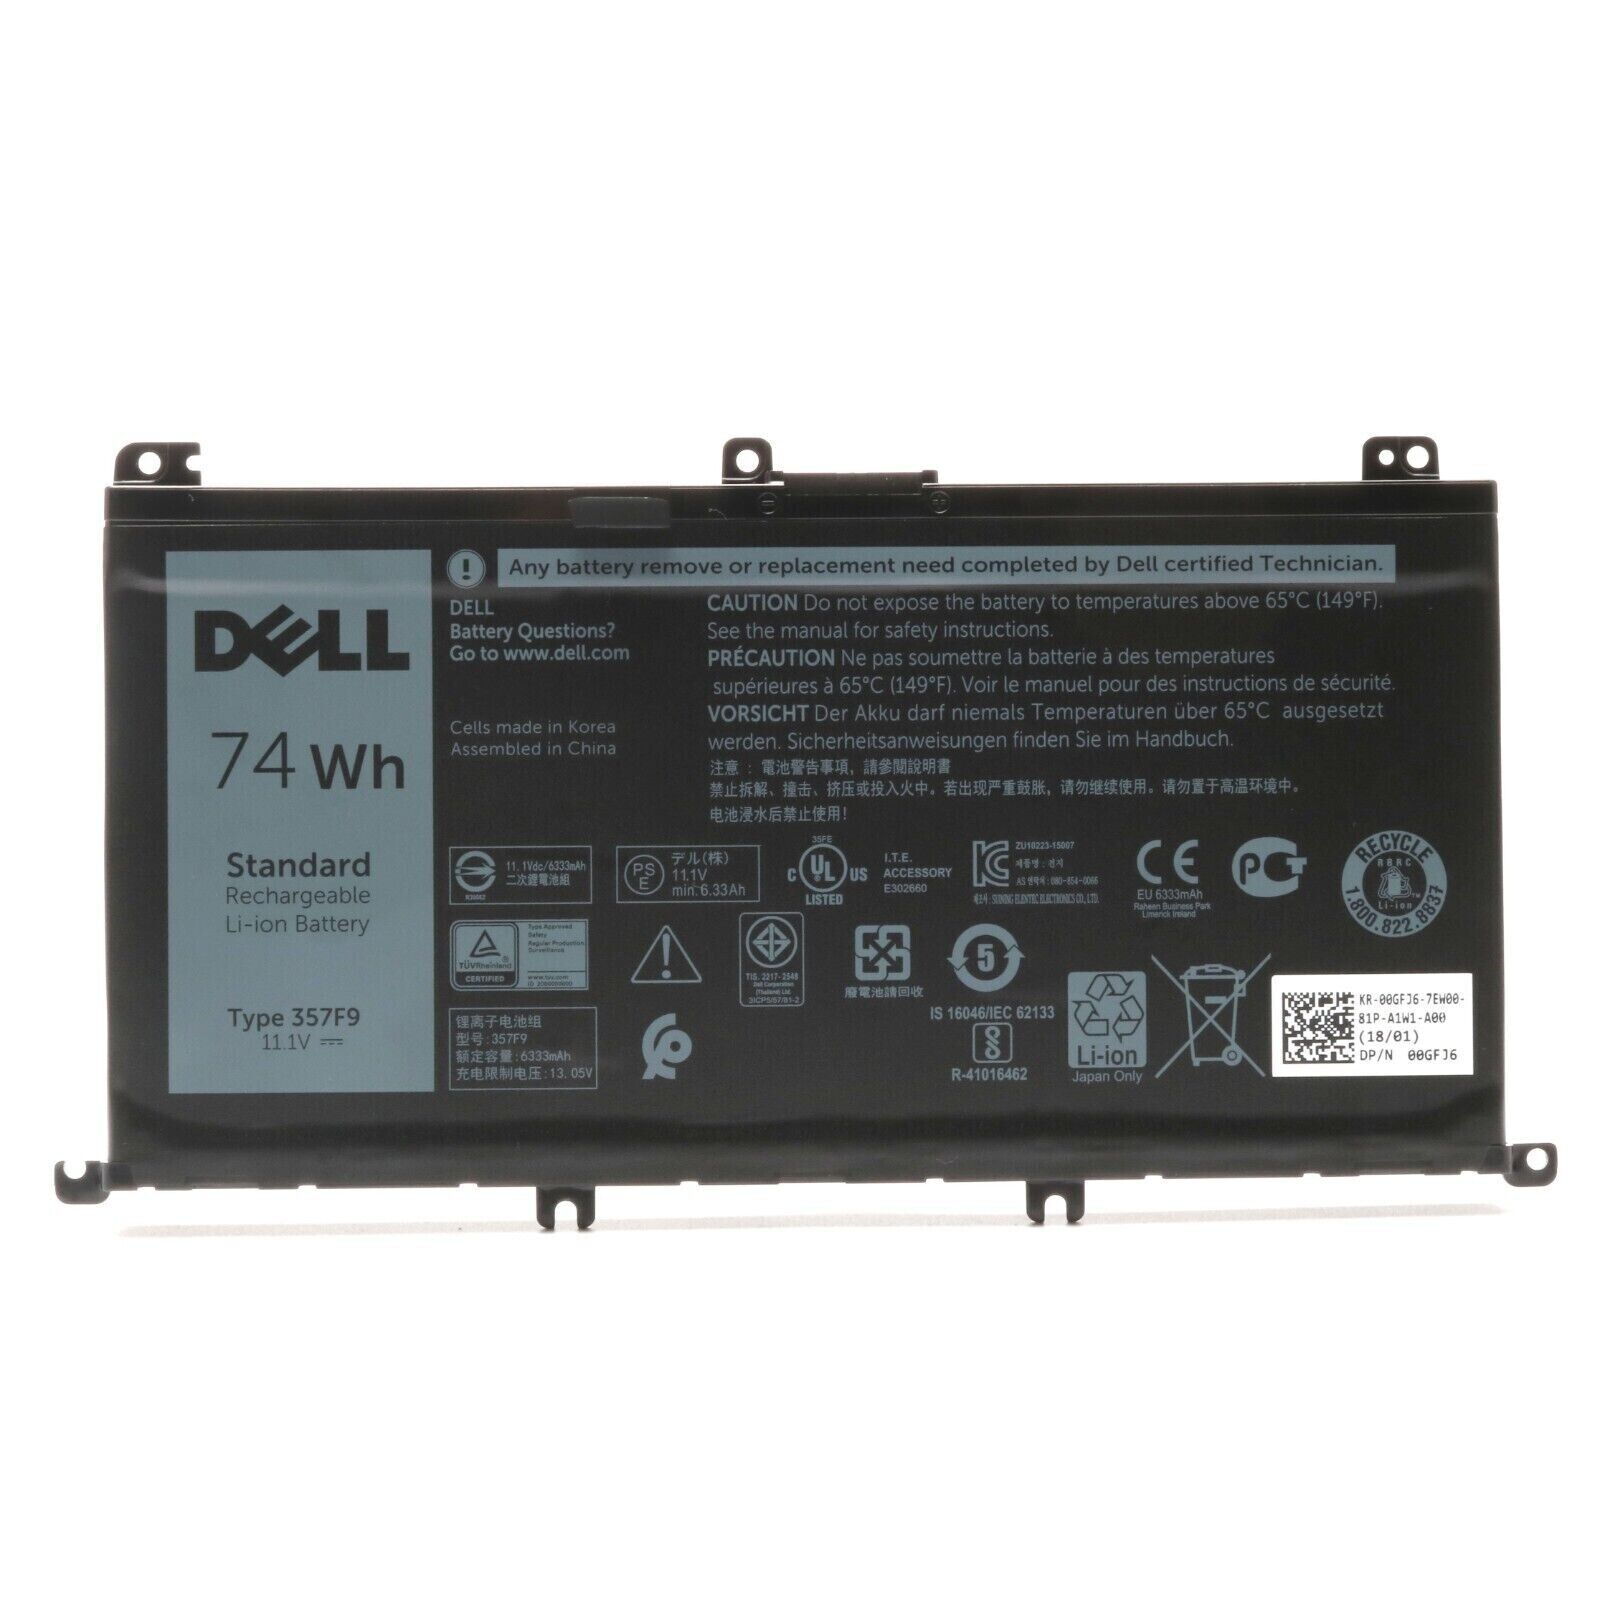 NEW OEM 357F9 Battery For Dell Inspiron 15 7000 7559 7557 7567 7566 7759 74wh US